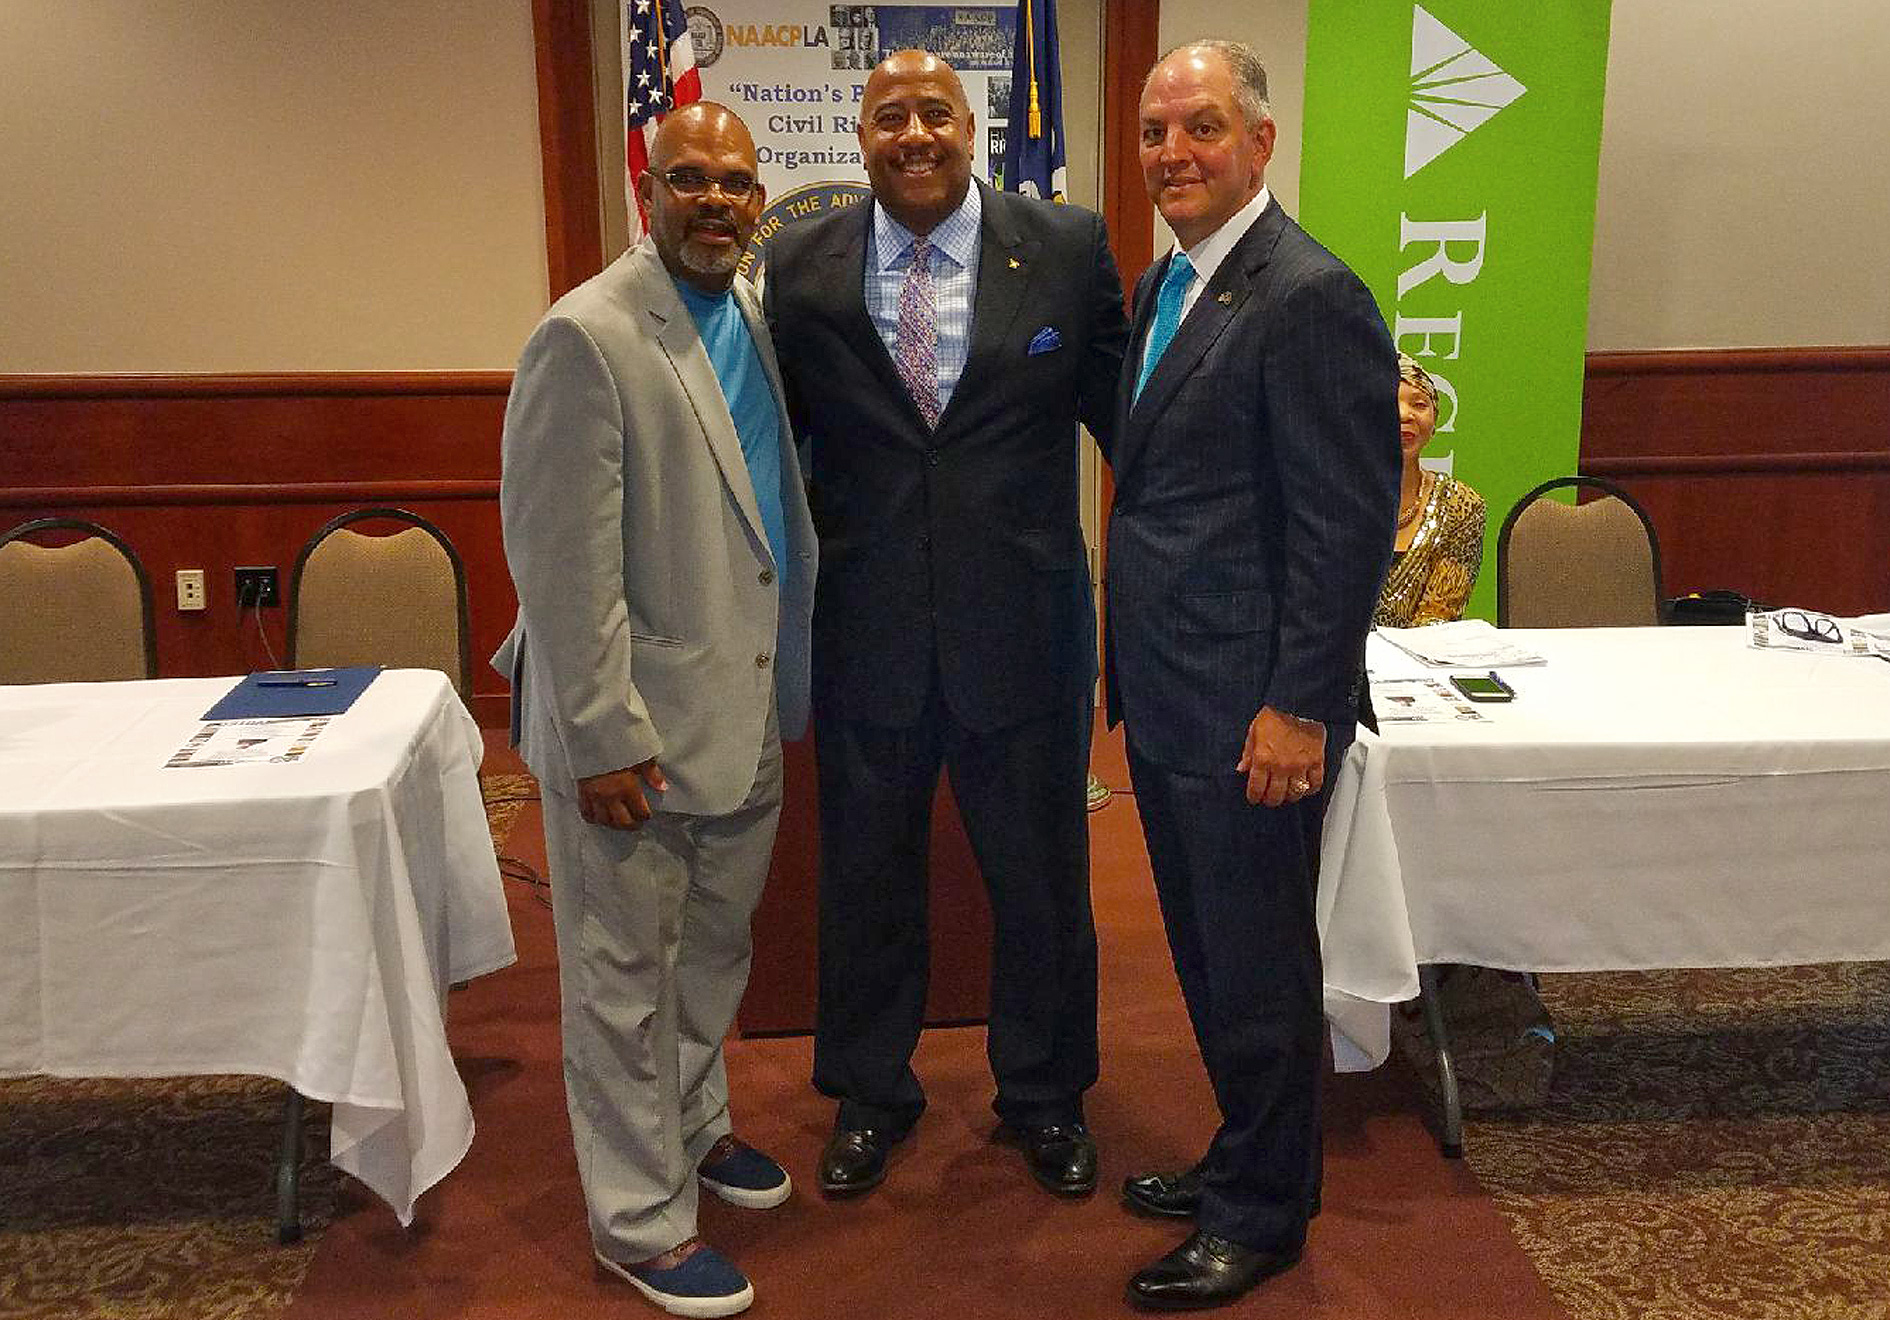 Louisiana NAACP President Mike McClanahan, Regions Community Development Manager Mike...